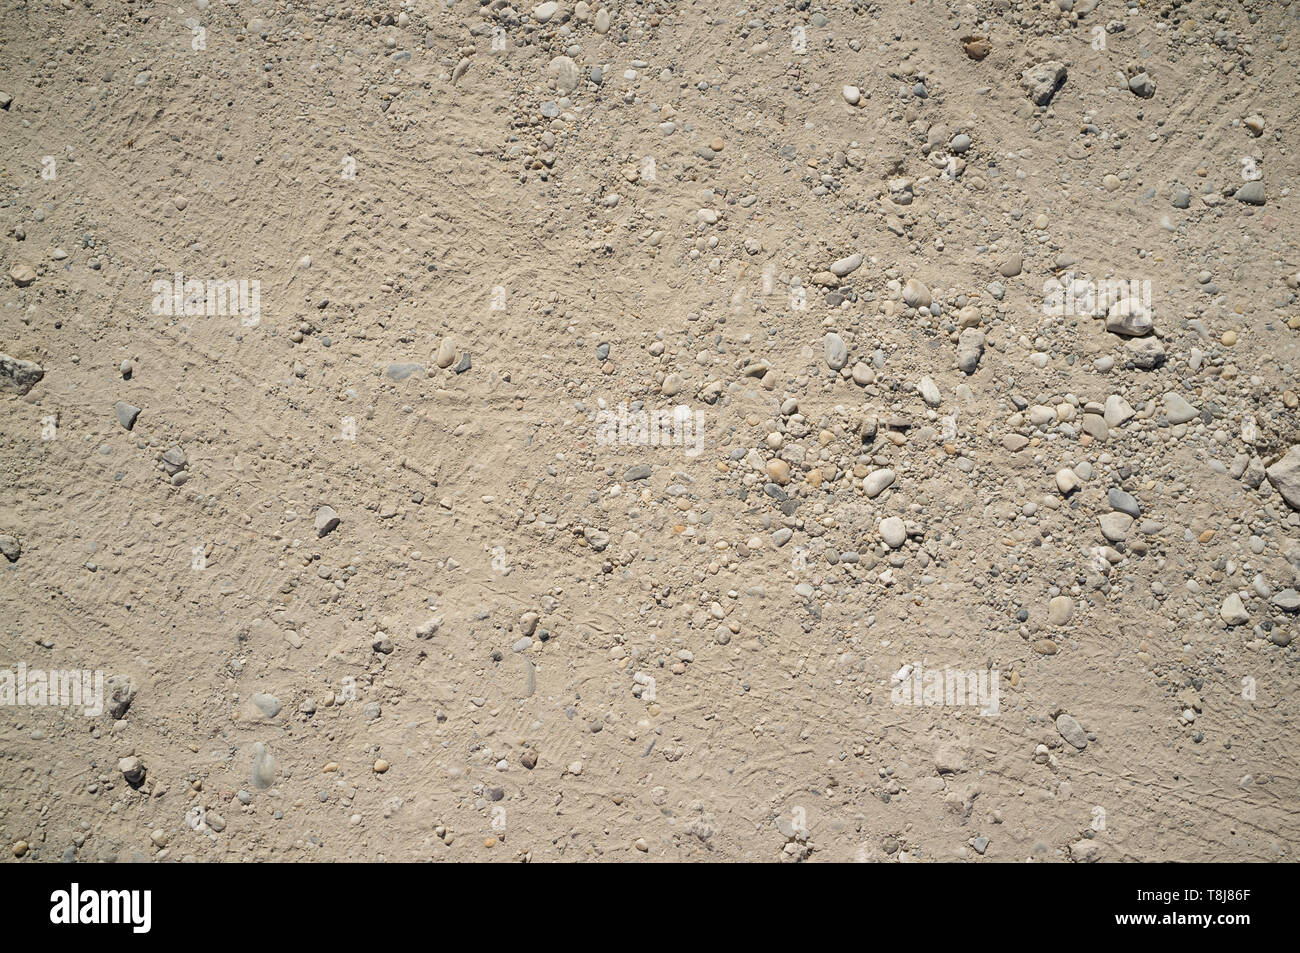 Dusty Road with Small Rocks, Dirt, Footprints, Car and Bicycle Traces Texture Stock Photo